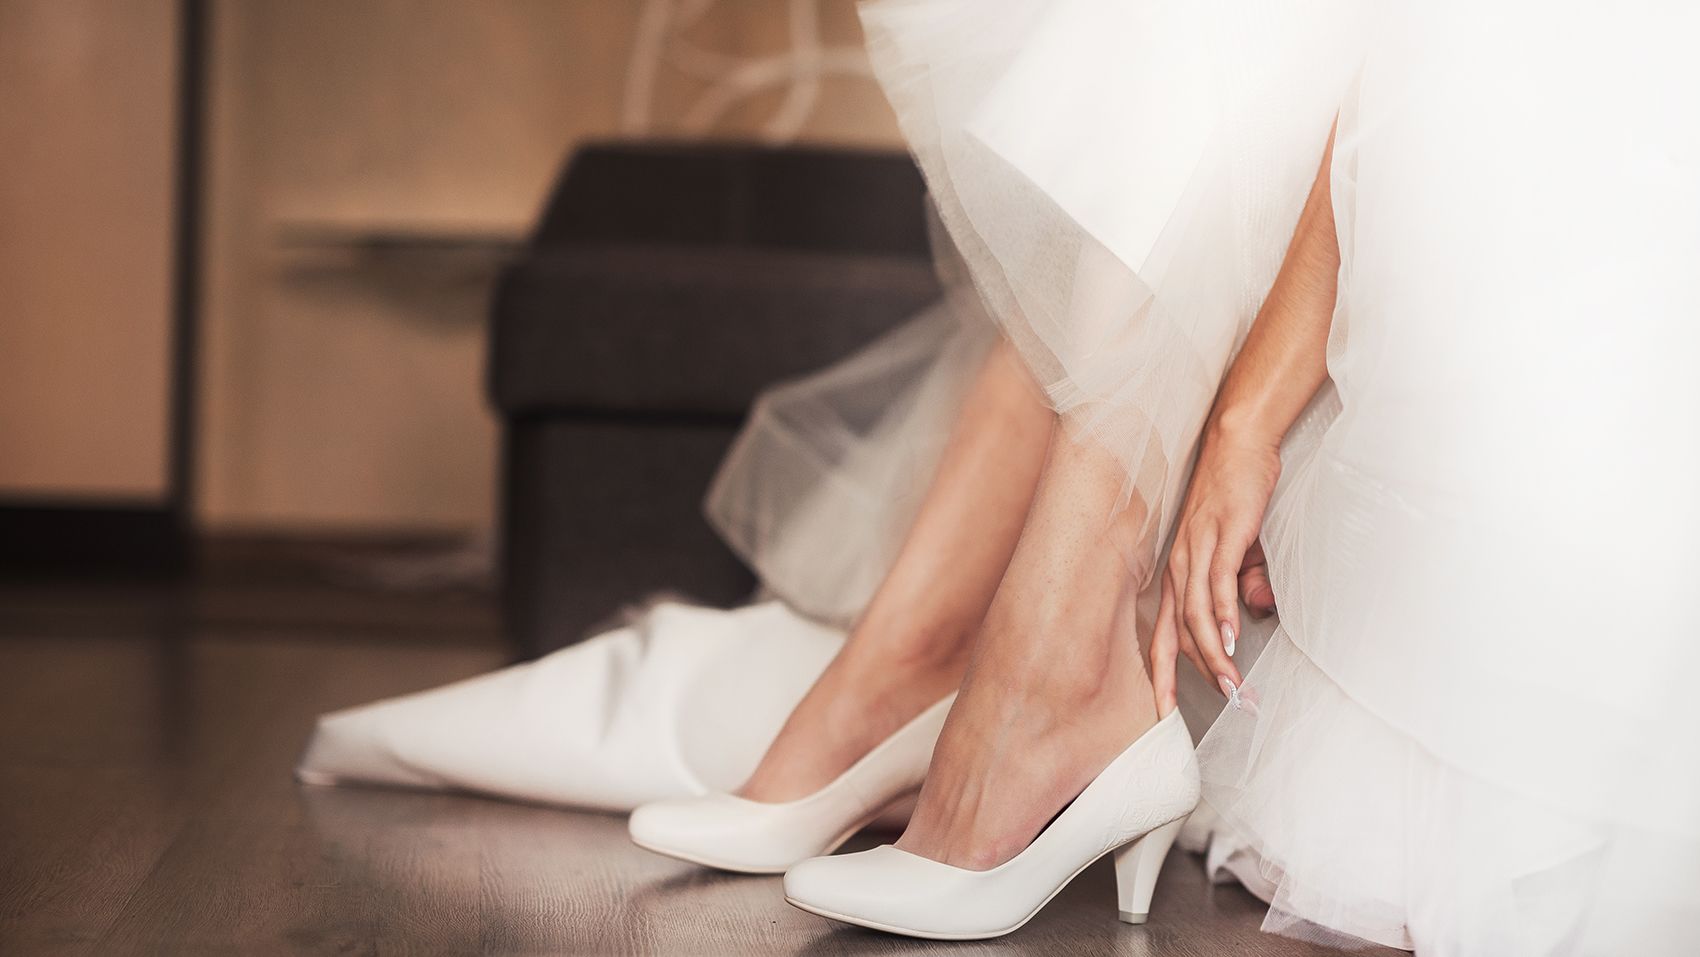 The Best Wedding Shoes for Summer Brides